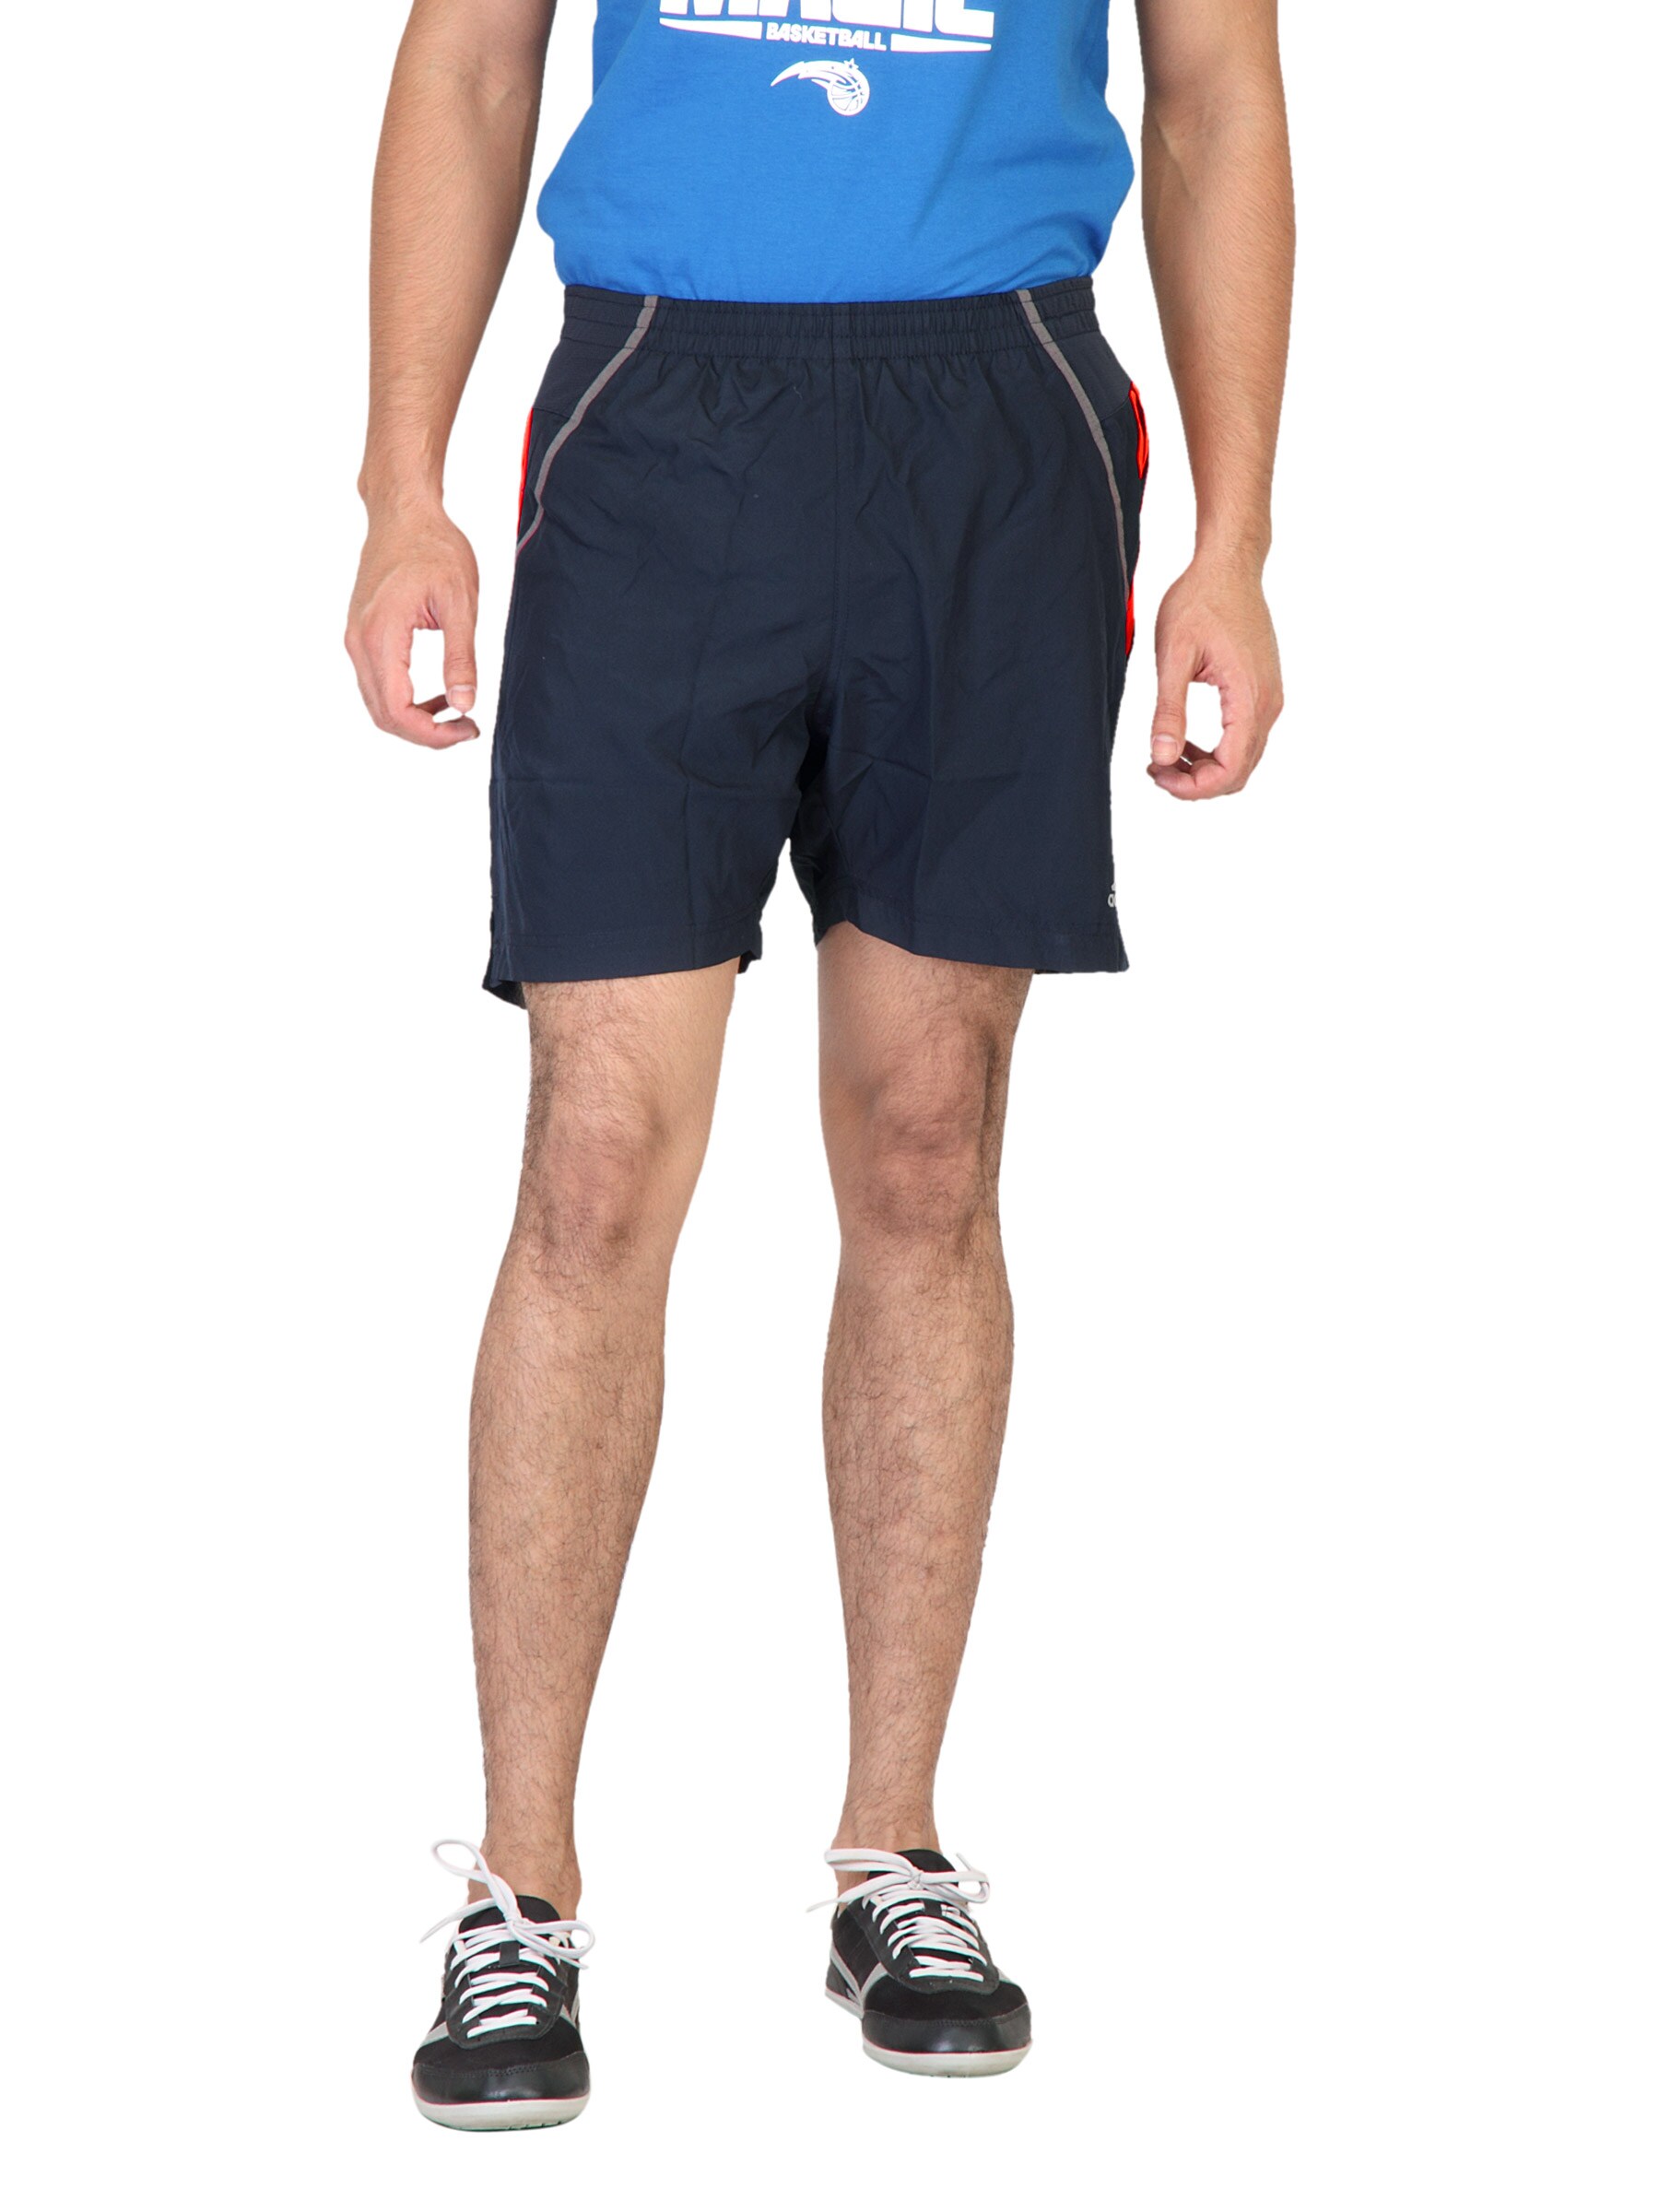 ADIDAS Men Rsp Ds 7in Navy Blue Shorts